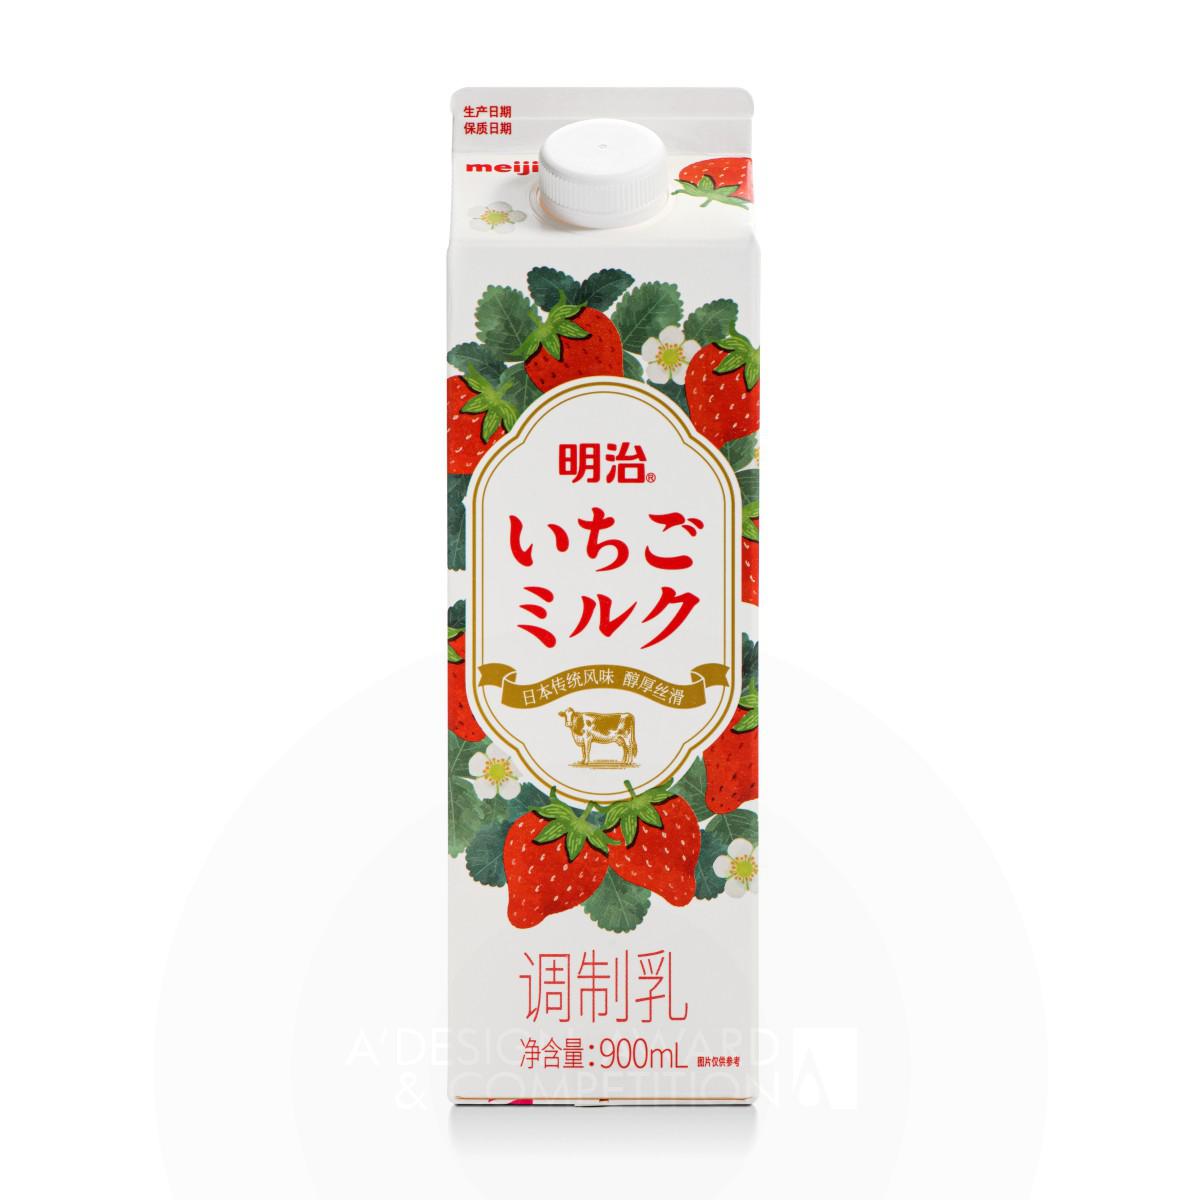 Kazuo Fukushima wins Bronze at the prestigious A' Packaging Design Award with Chilled Milk Packaging.